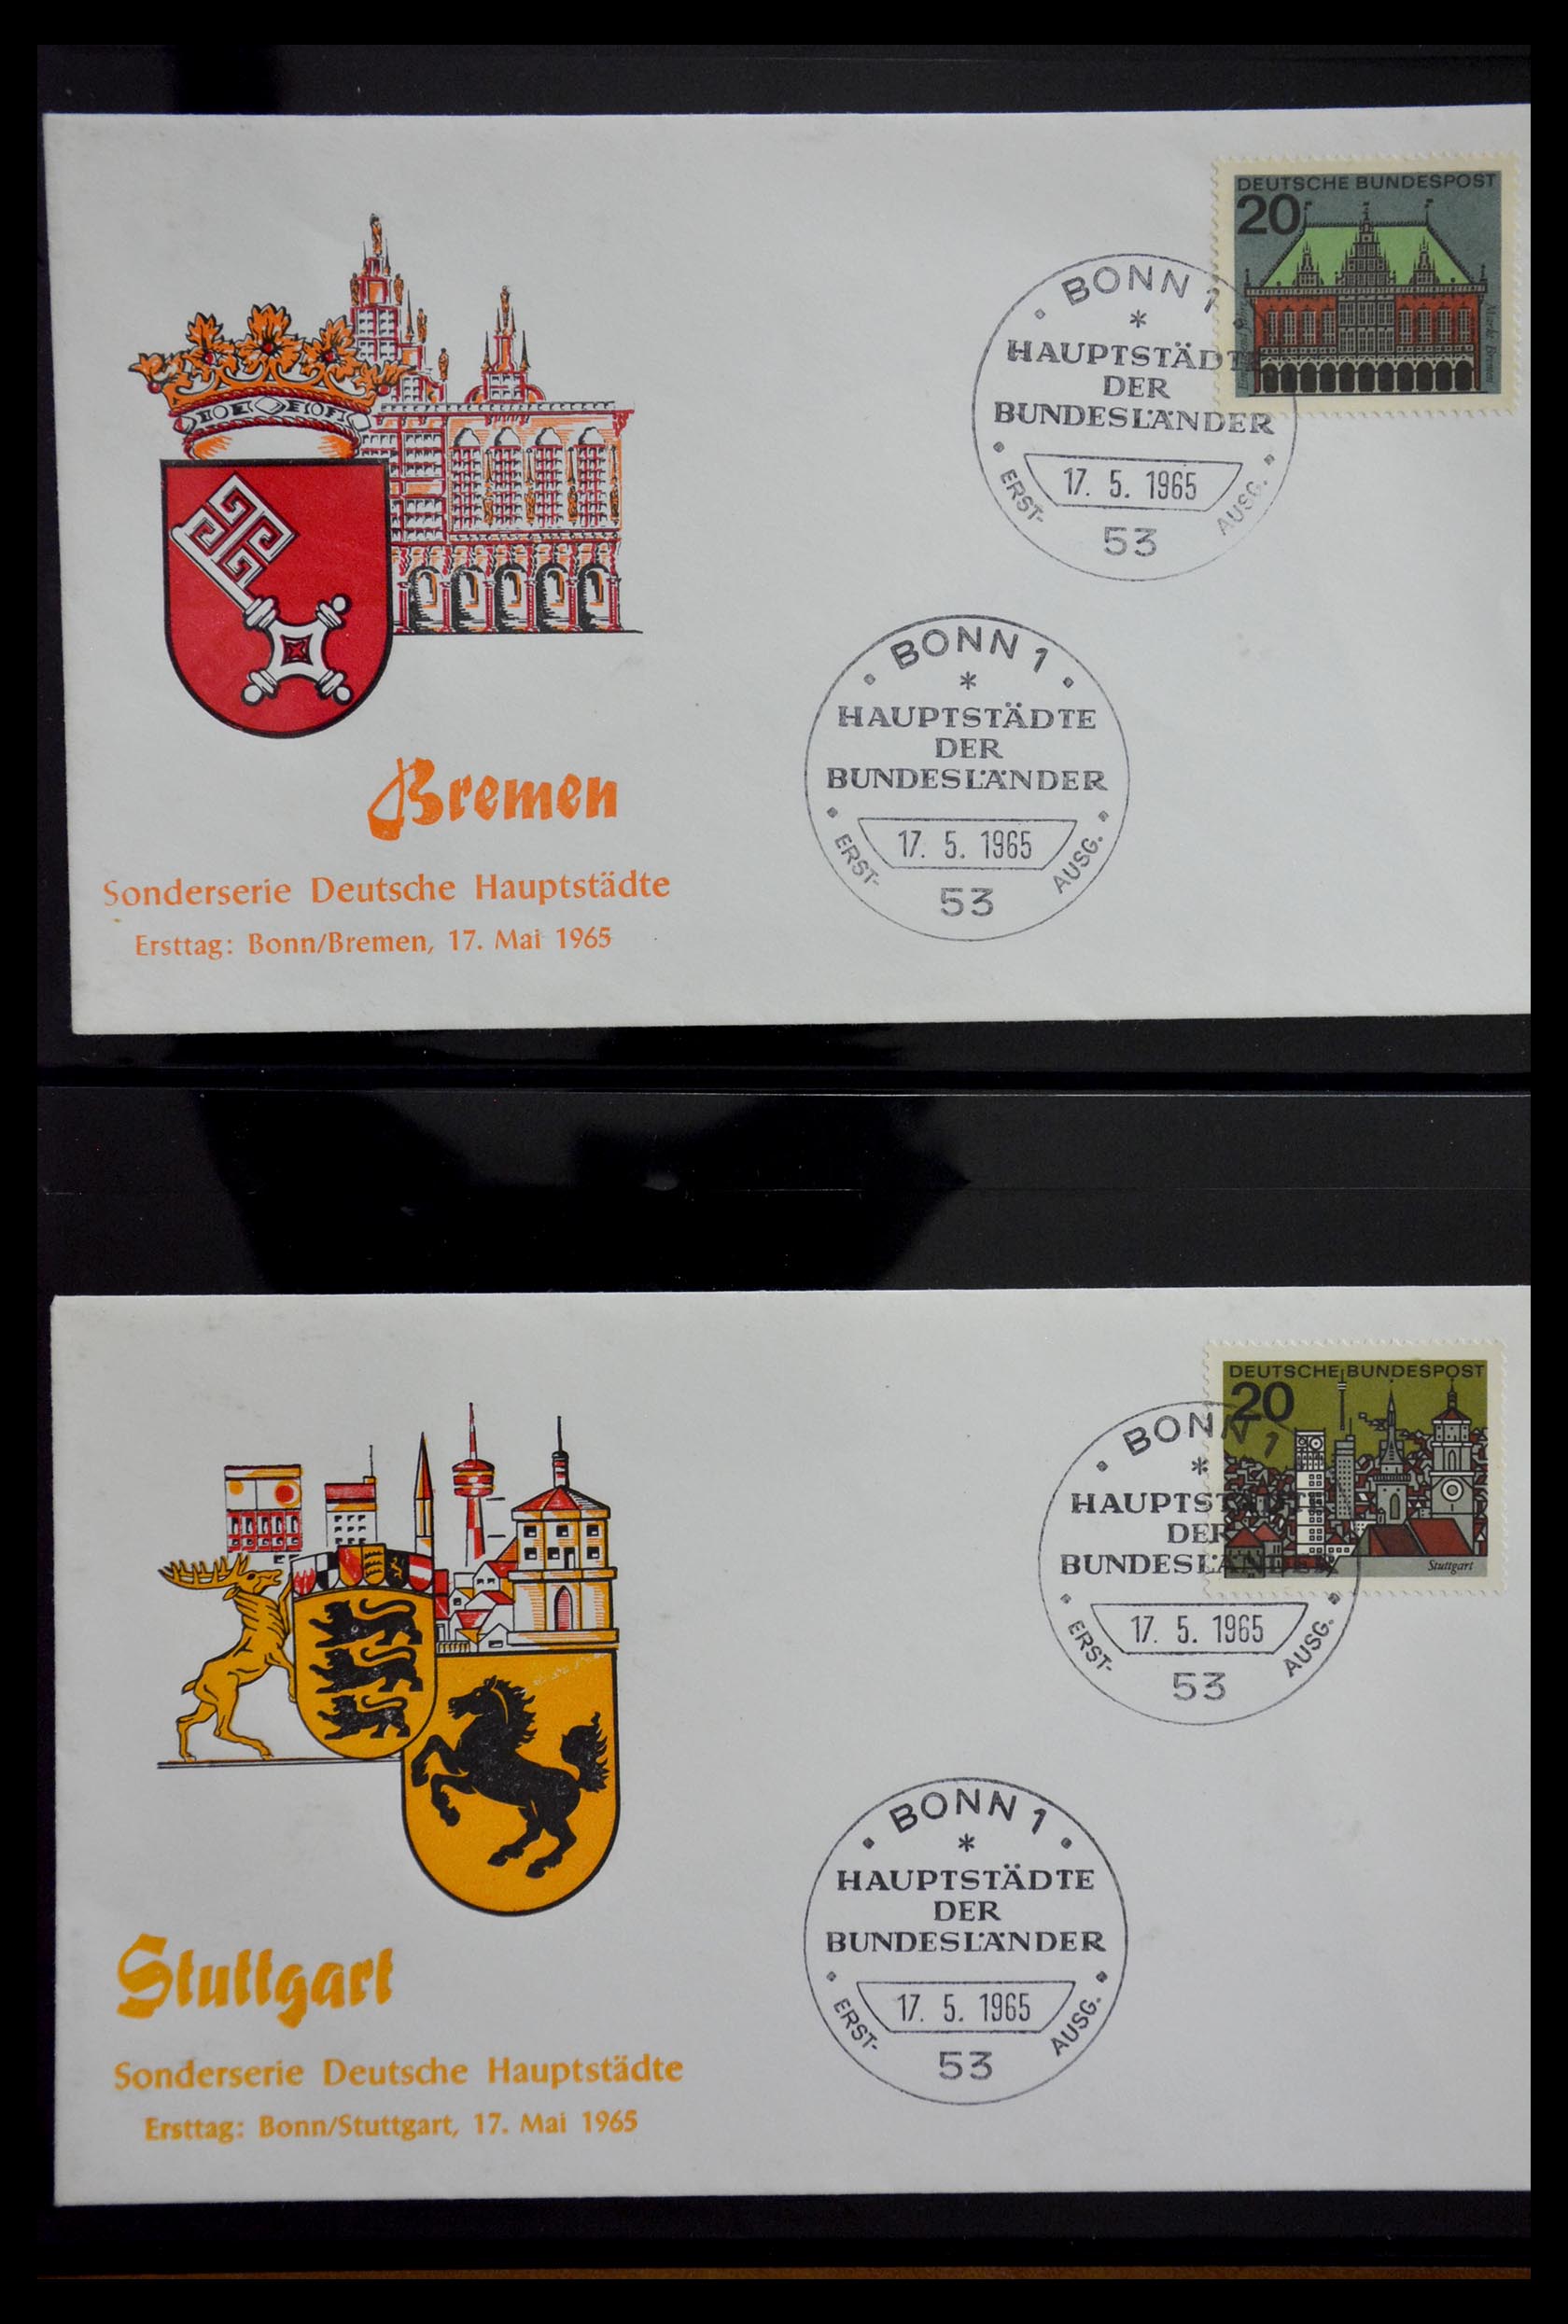 29382 031 - 29382 Germany covers and FDC's 1936-1965.